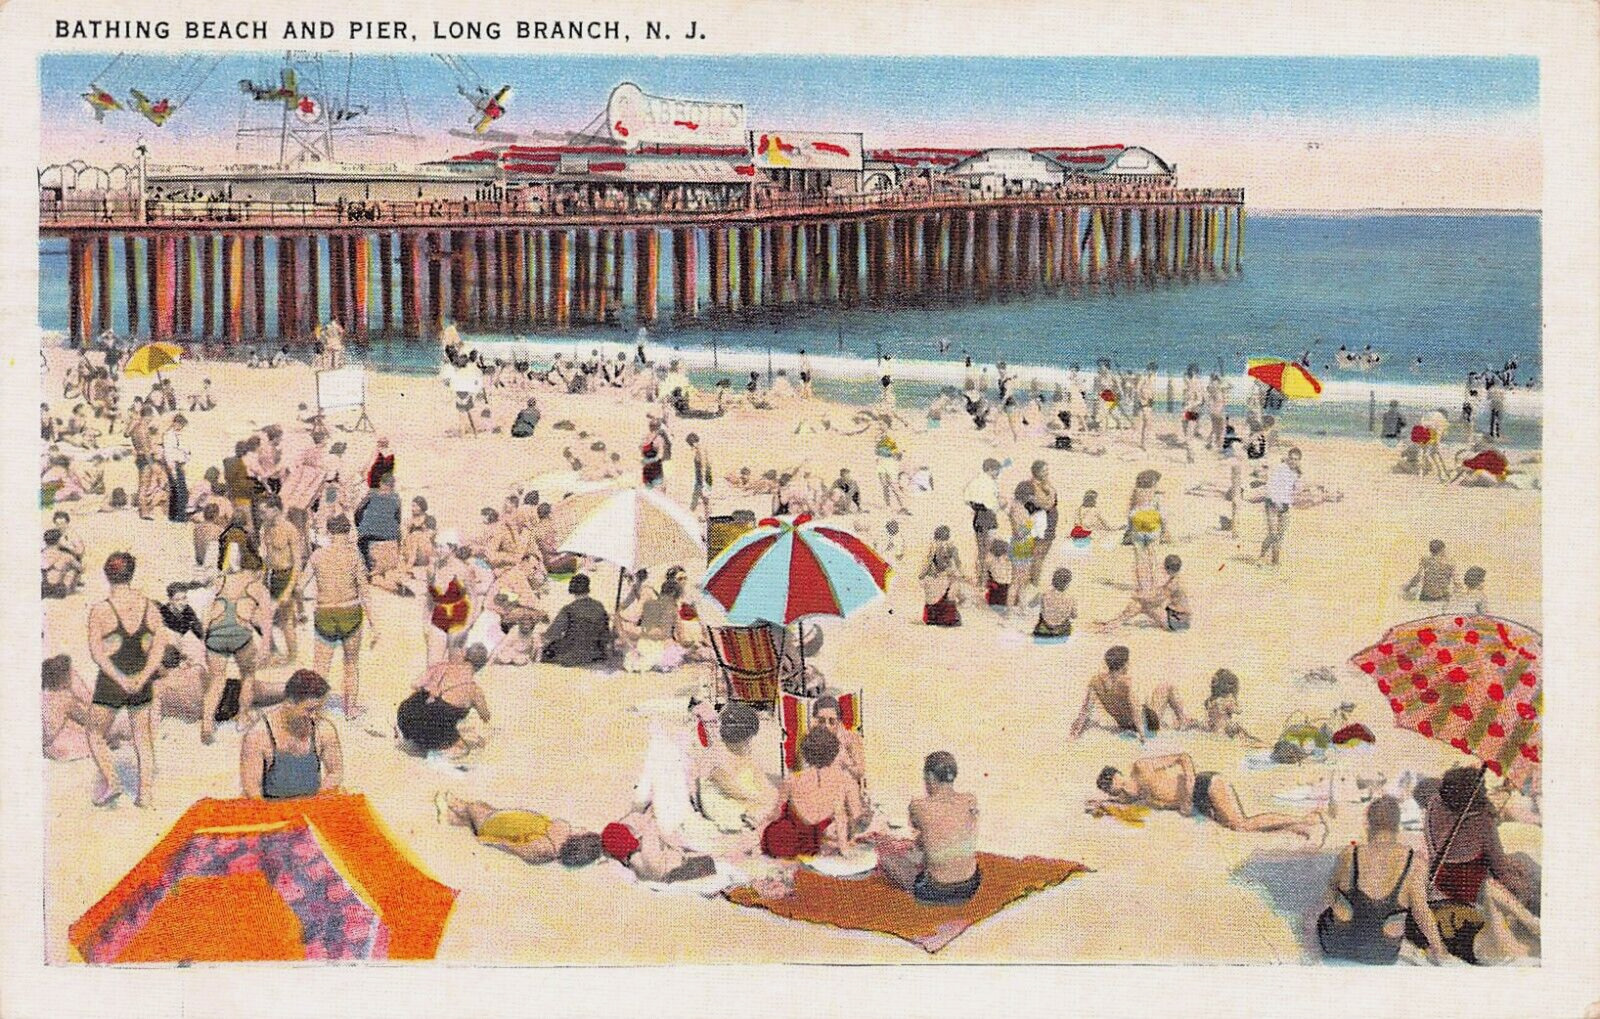 Bathing Beach and Pier, Long Branch, New Jersey, 1936 Linen Postcard, Used